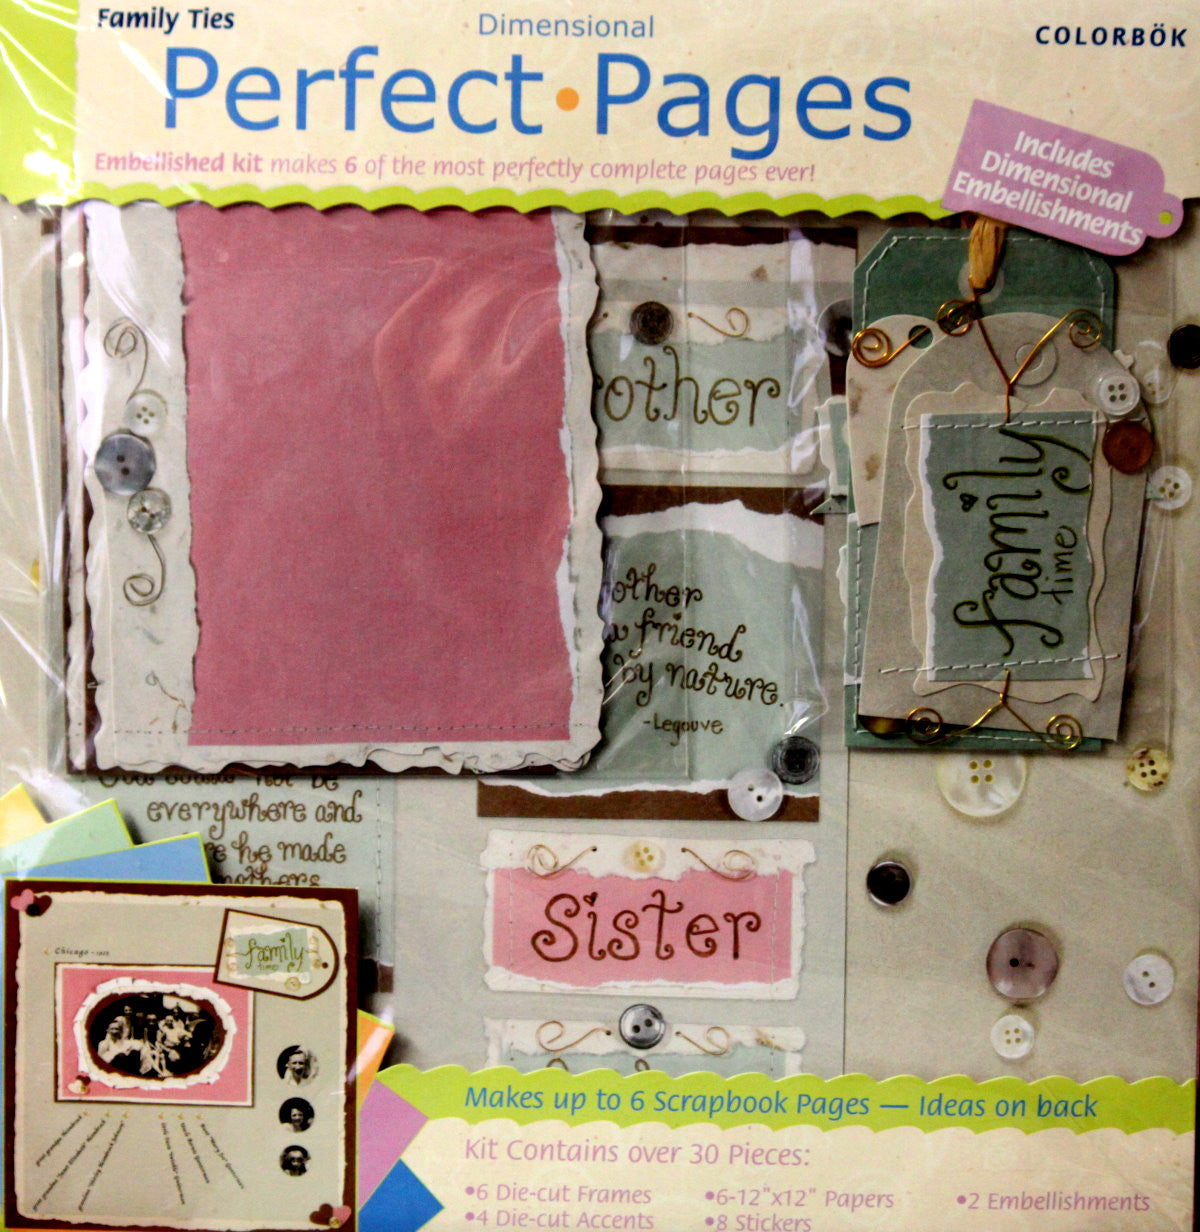 Colorbok Perfect Pages 12 x 12 Famiy Ties Dimensional Scrapbook Pages Kit - SCRAPBOOKFARE